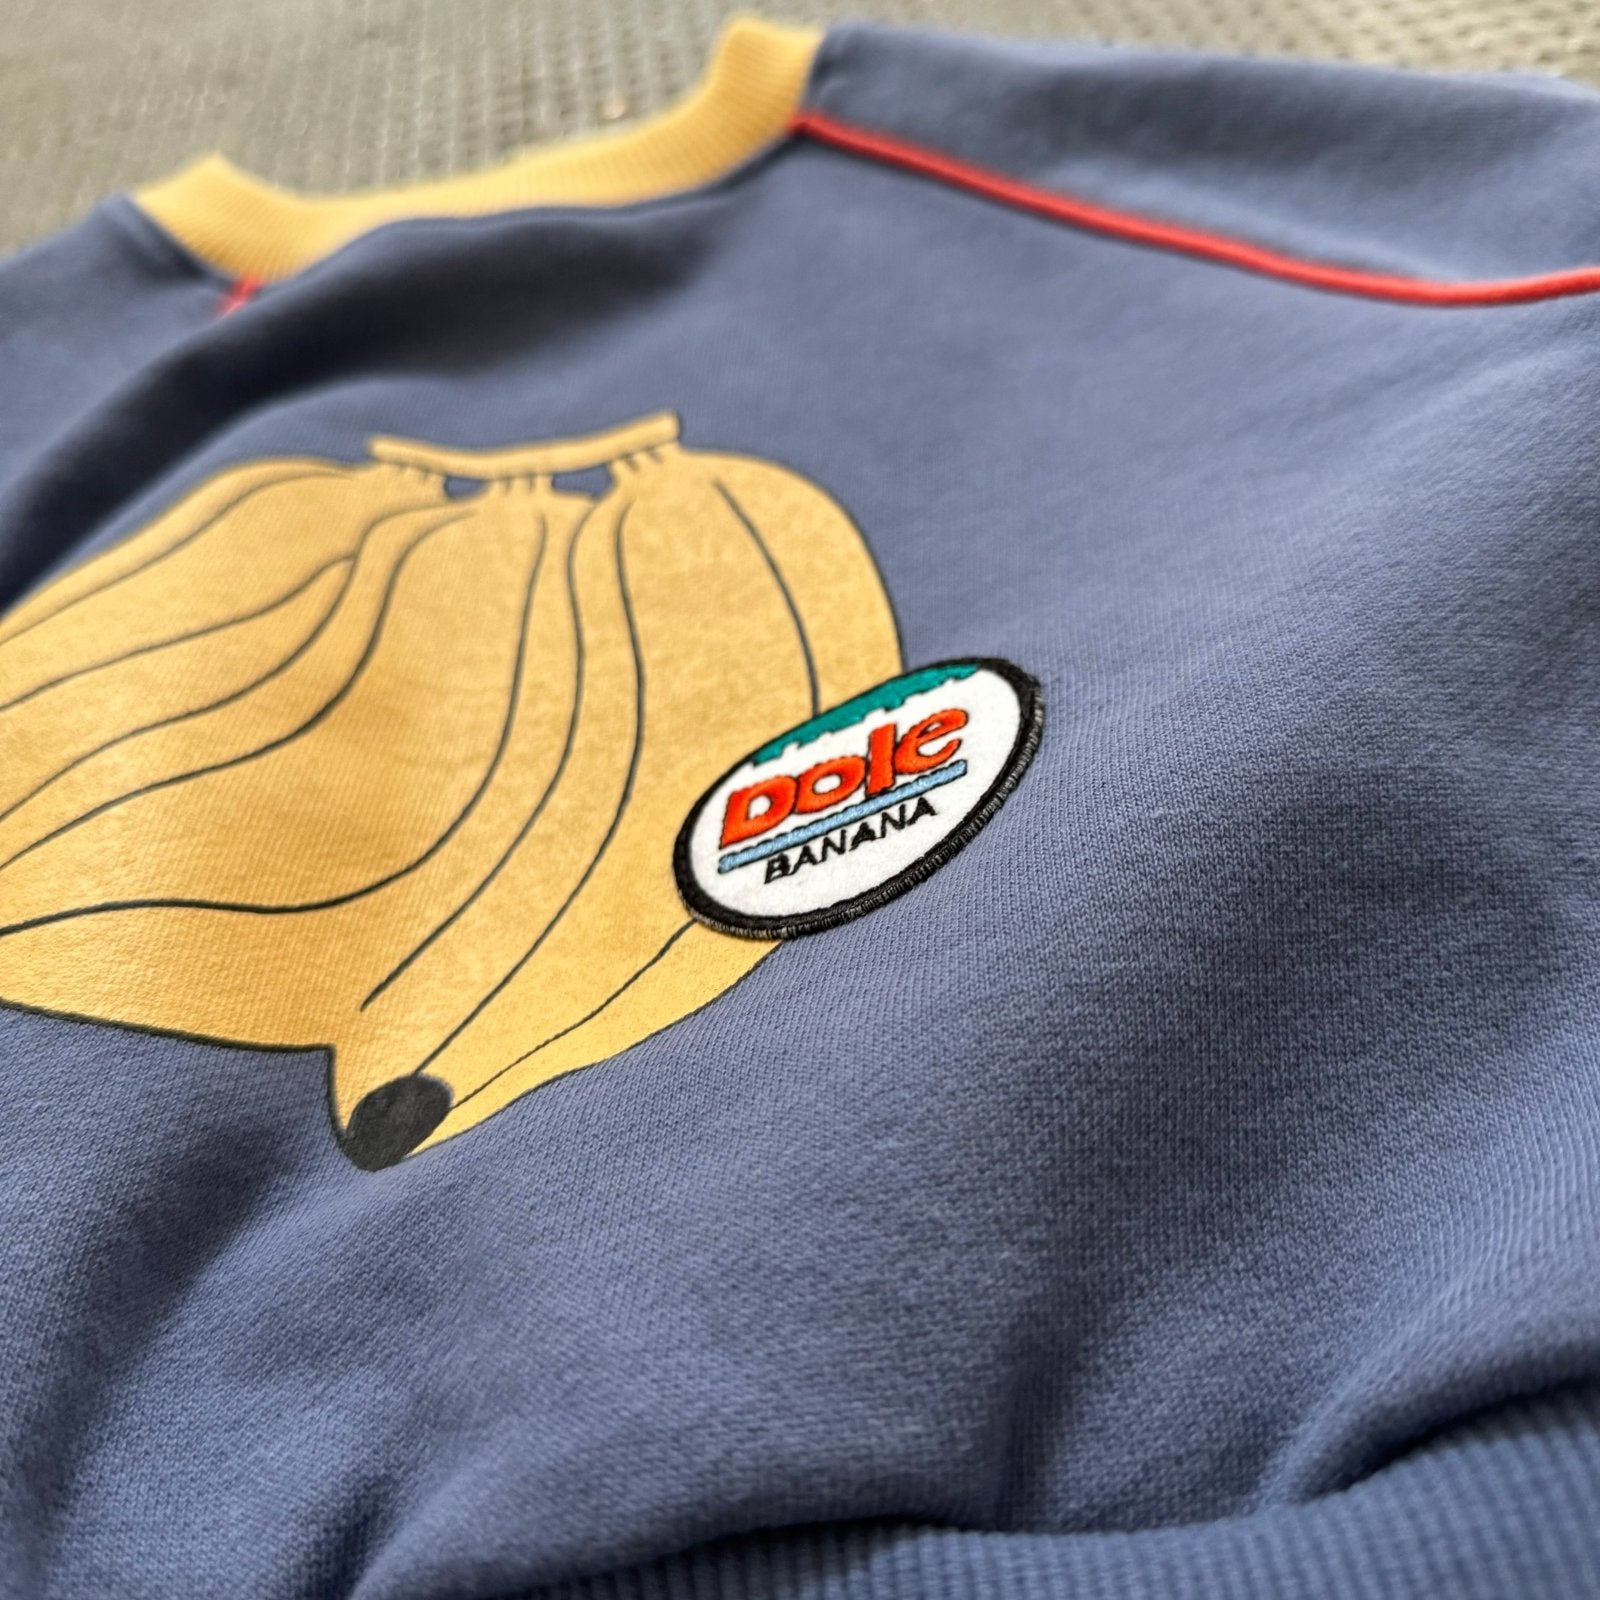 Banana Wappen Sweatshirt find Stylish Fashion for Little People- at Little Foxx Concept Store